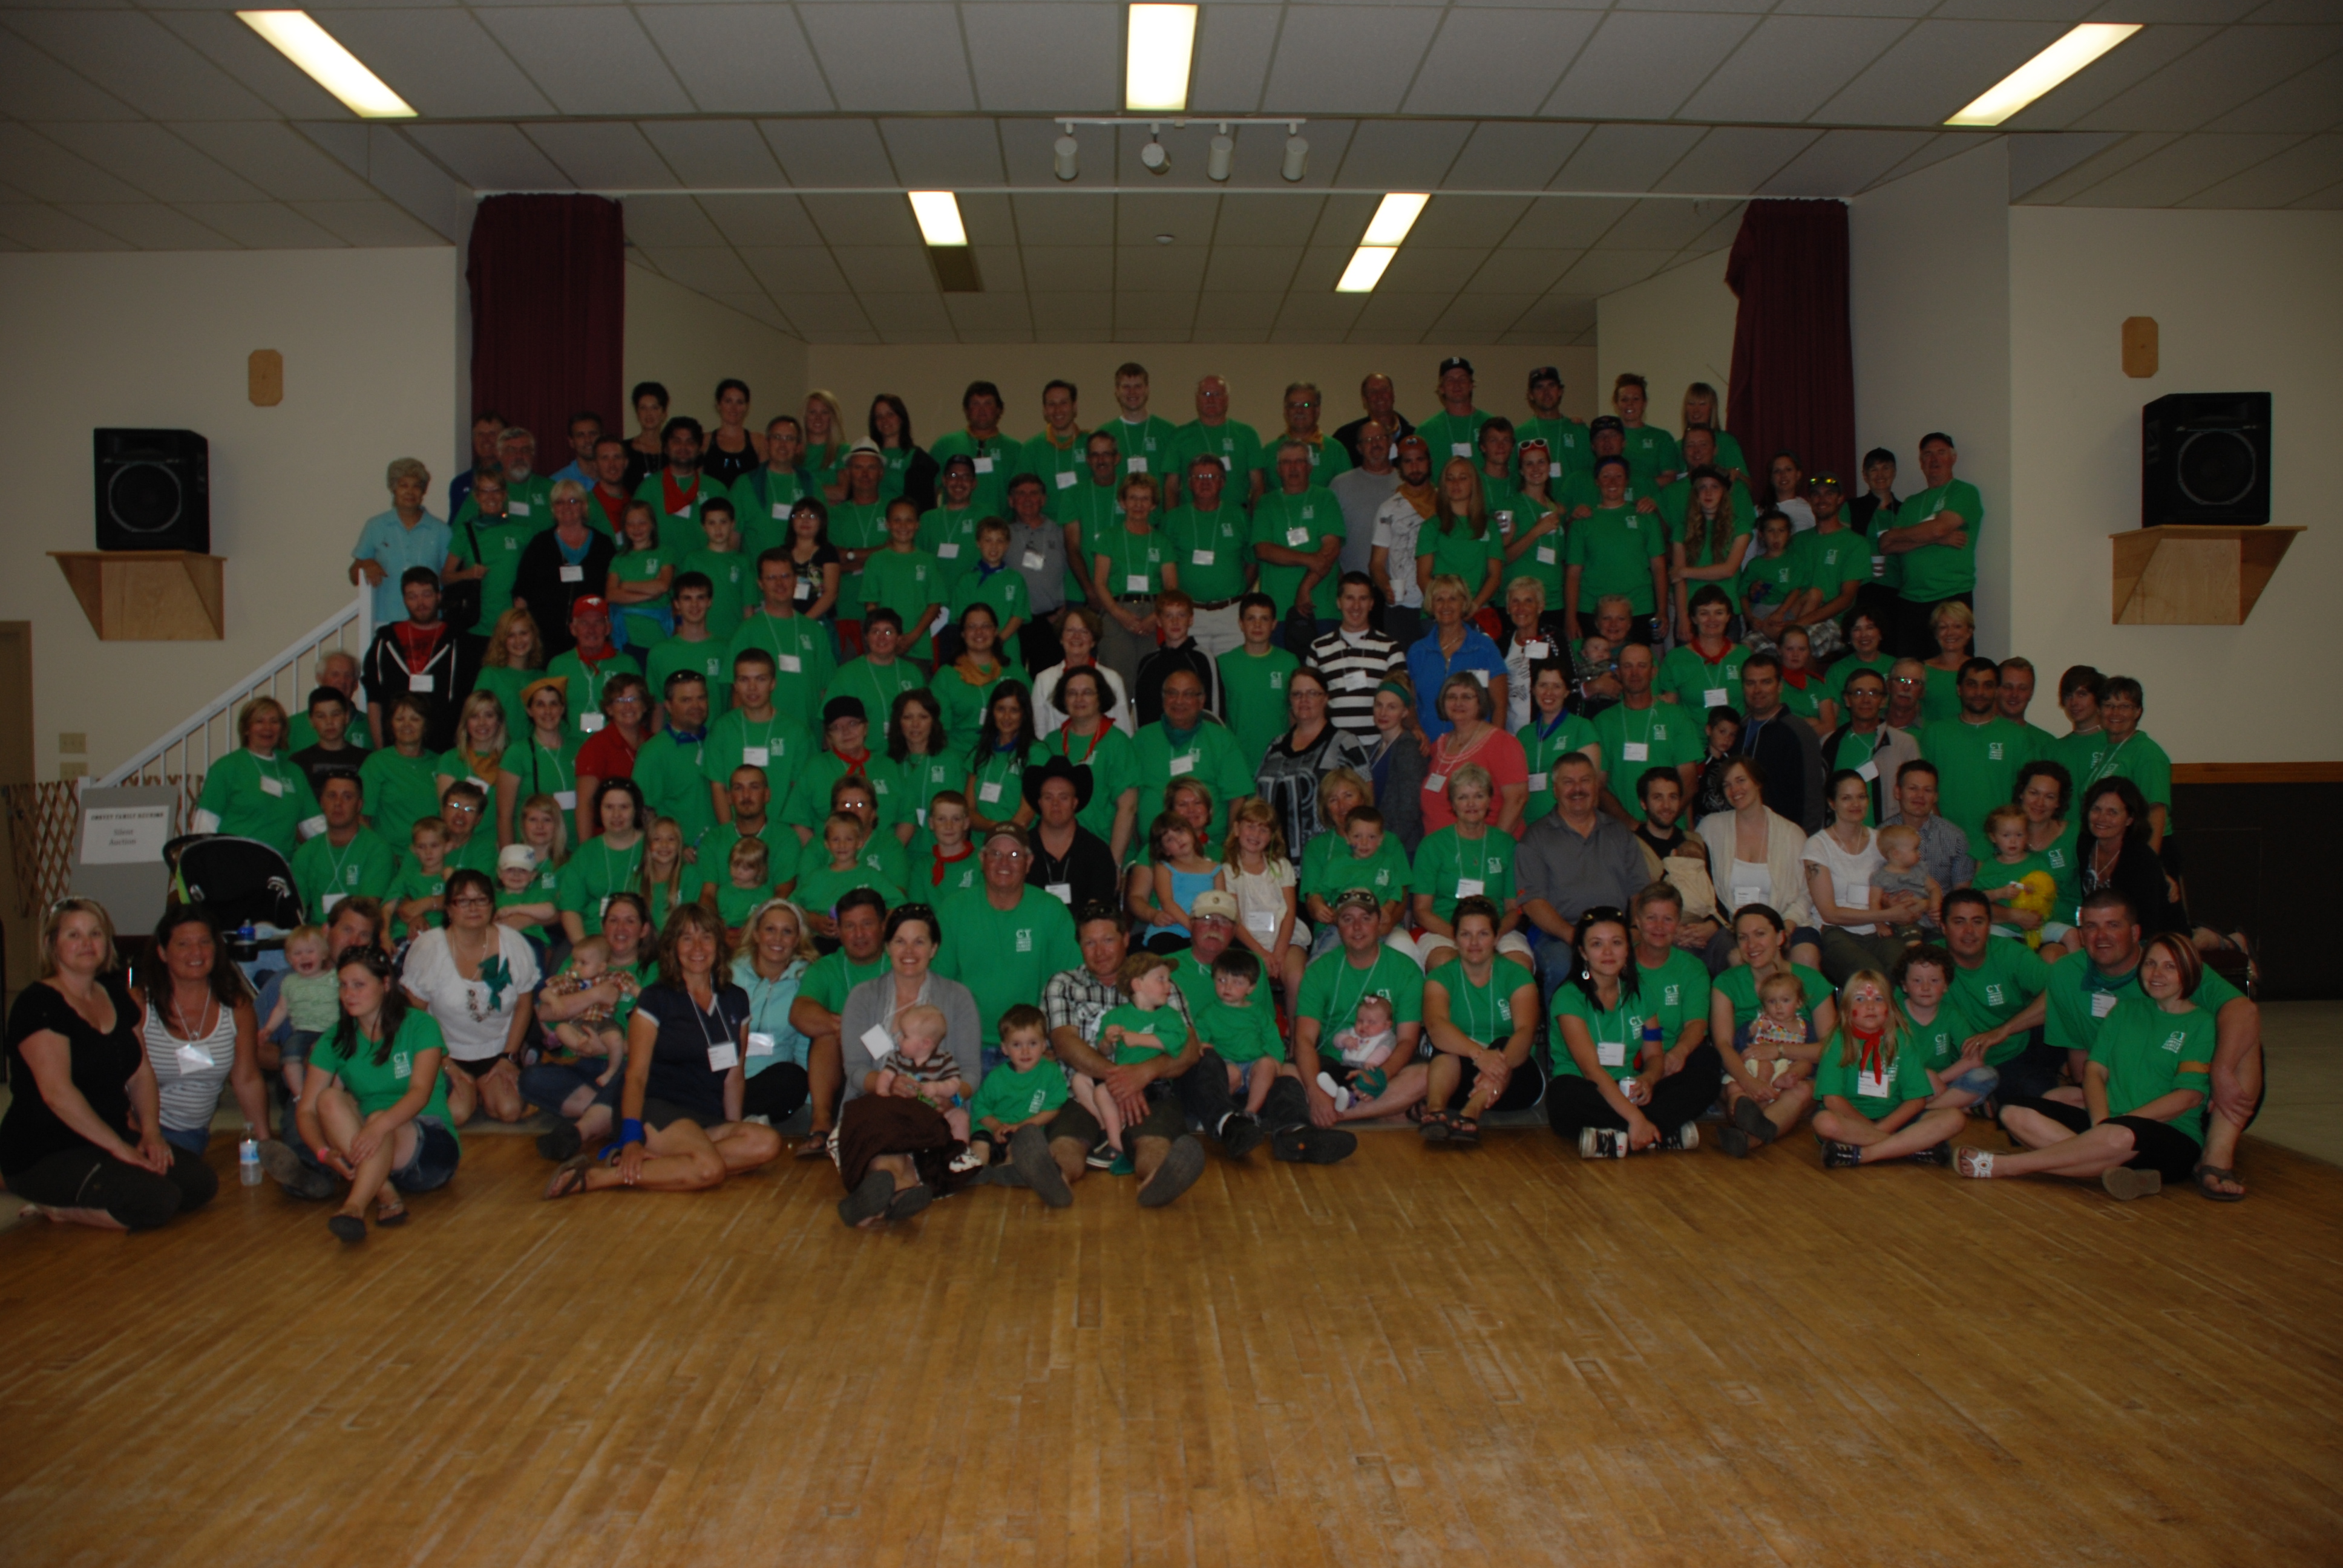 Group photo from the 2011 Convey reunion. Nice of everyone to dress in Rider green for the Saskatchewan cousins (hee hee).